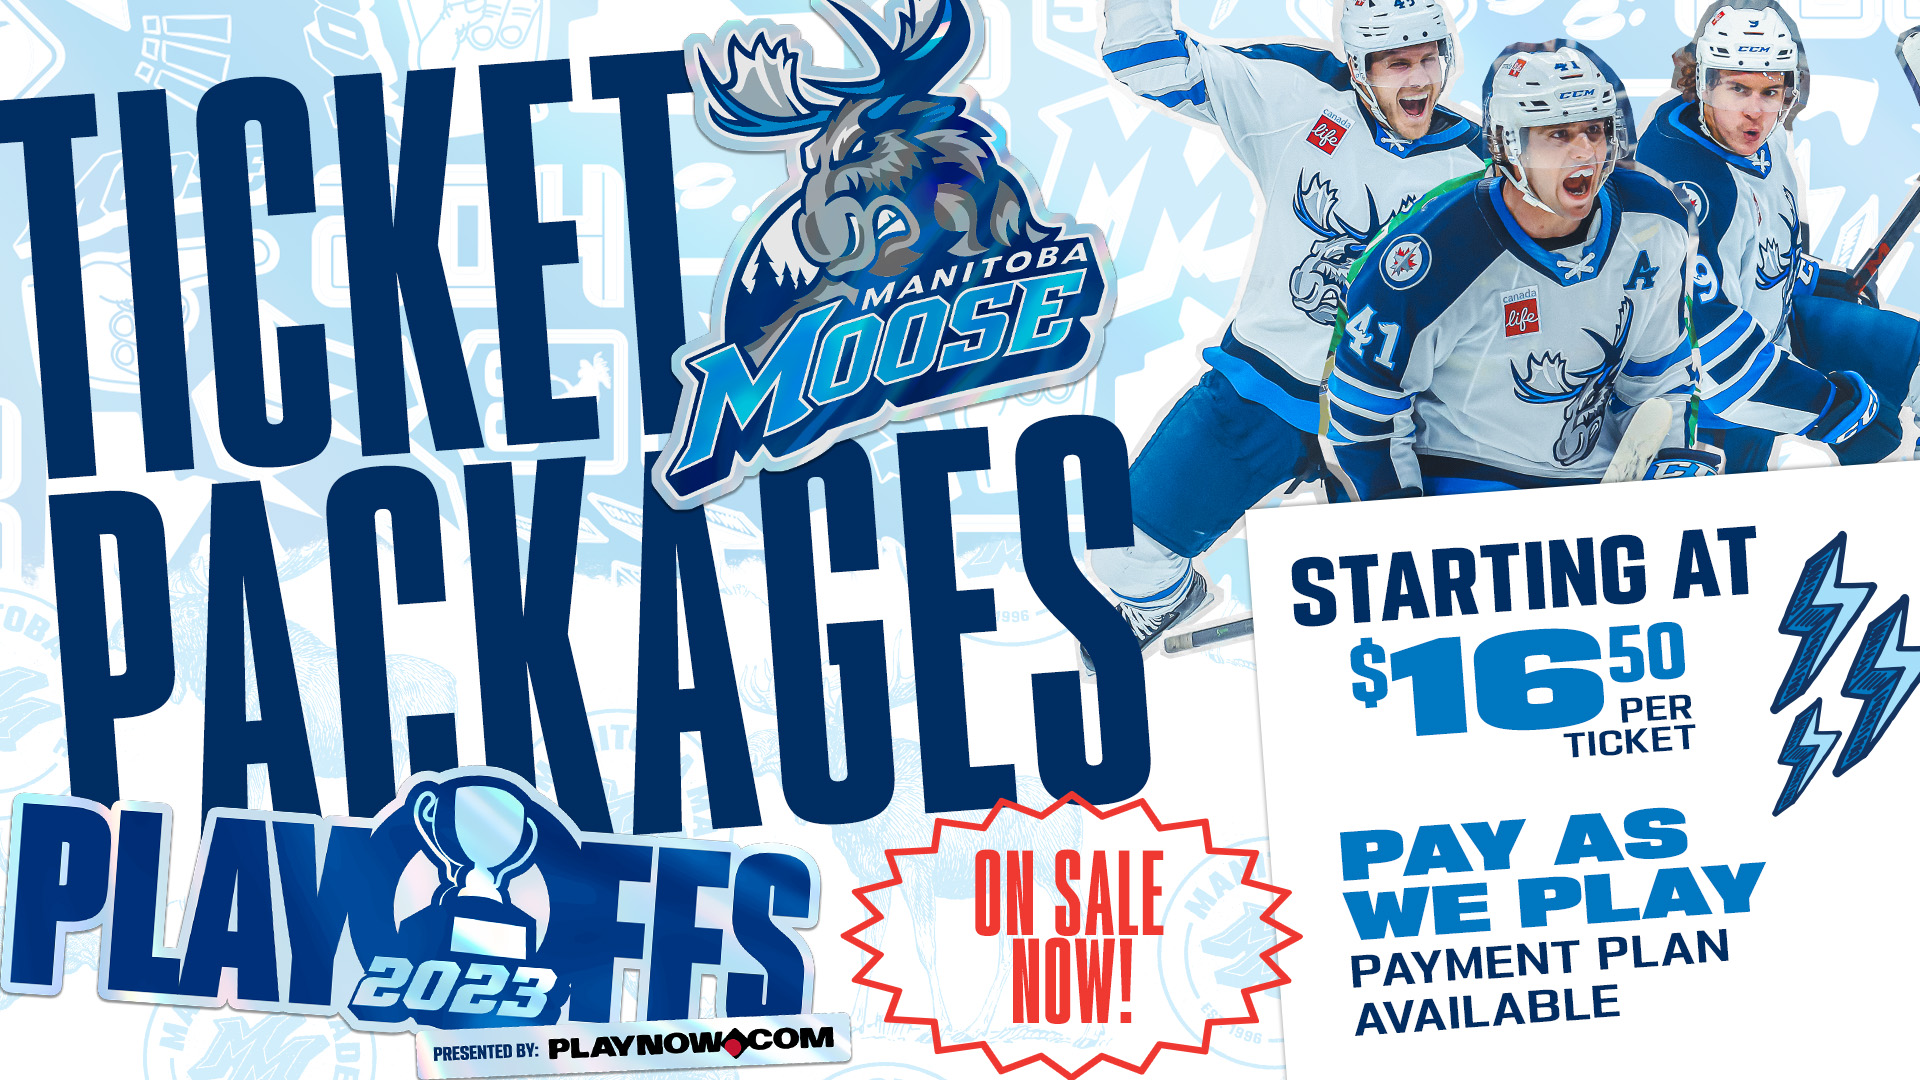 2023 Calder Cup Playoffs Ticket Packages on Sale Now